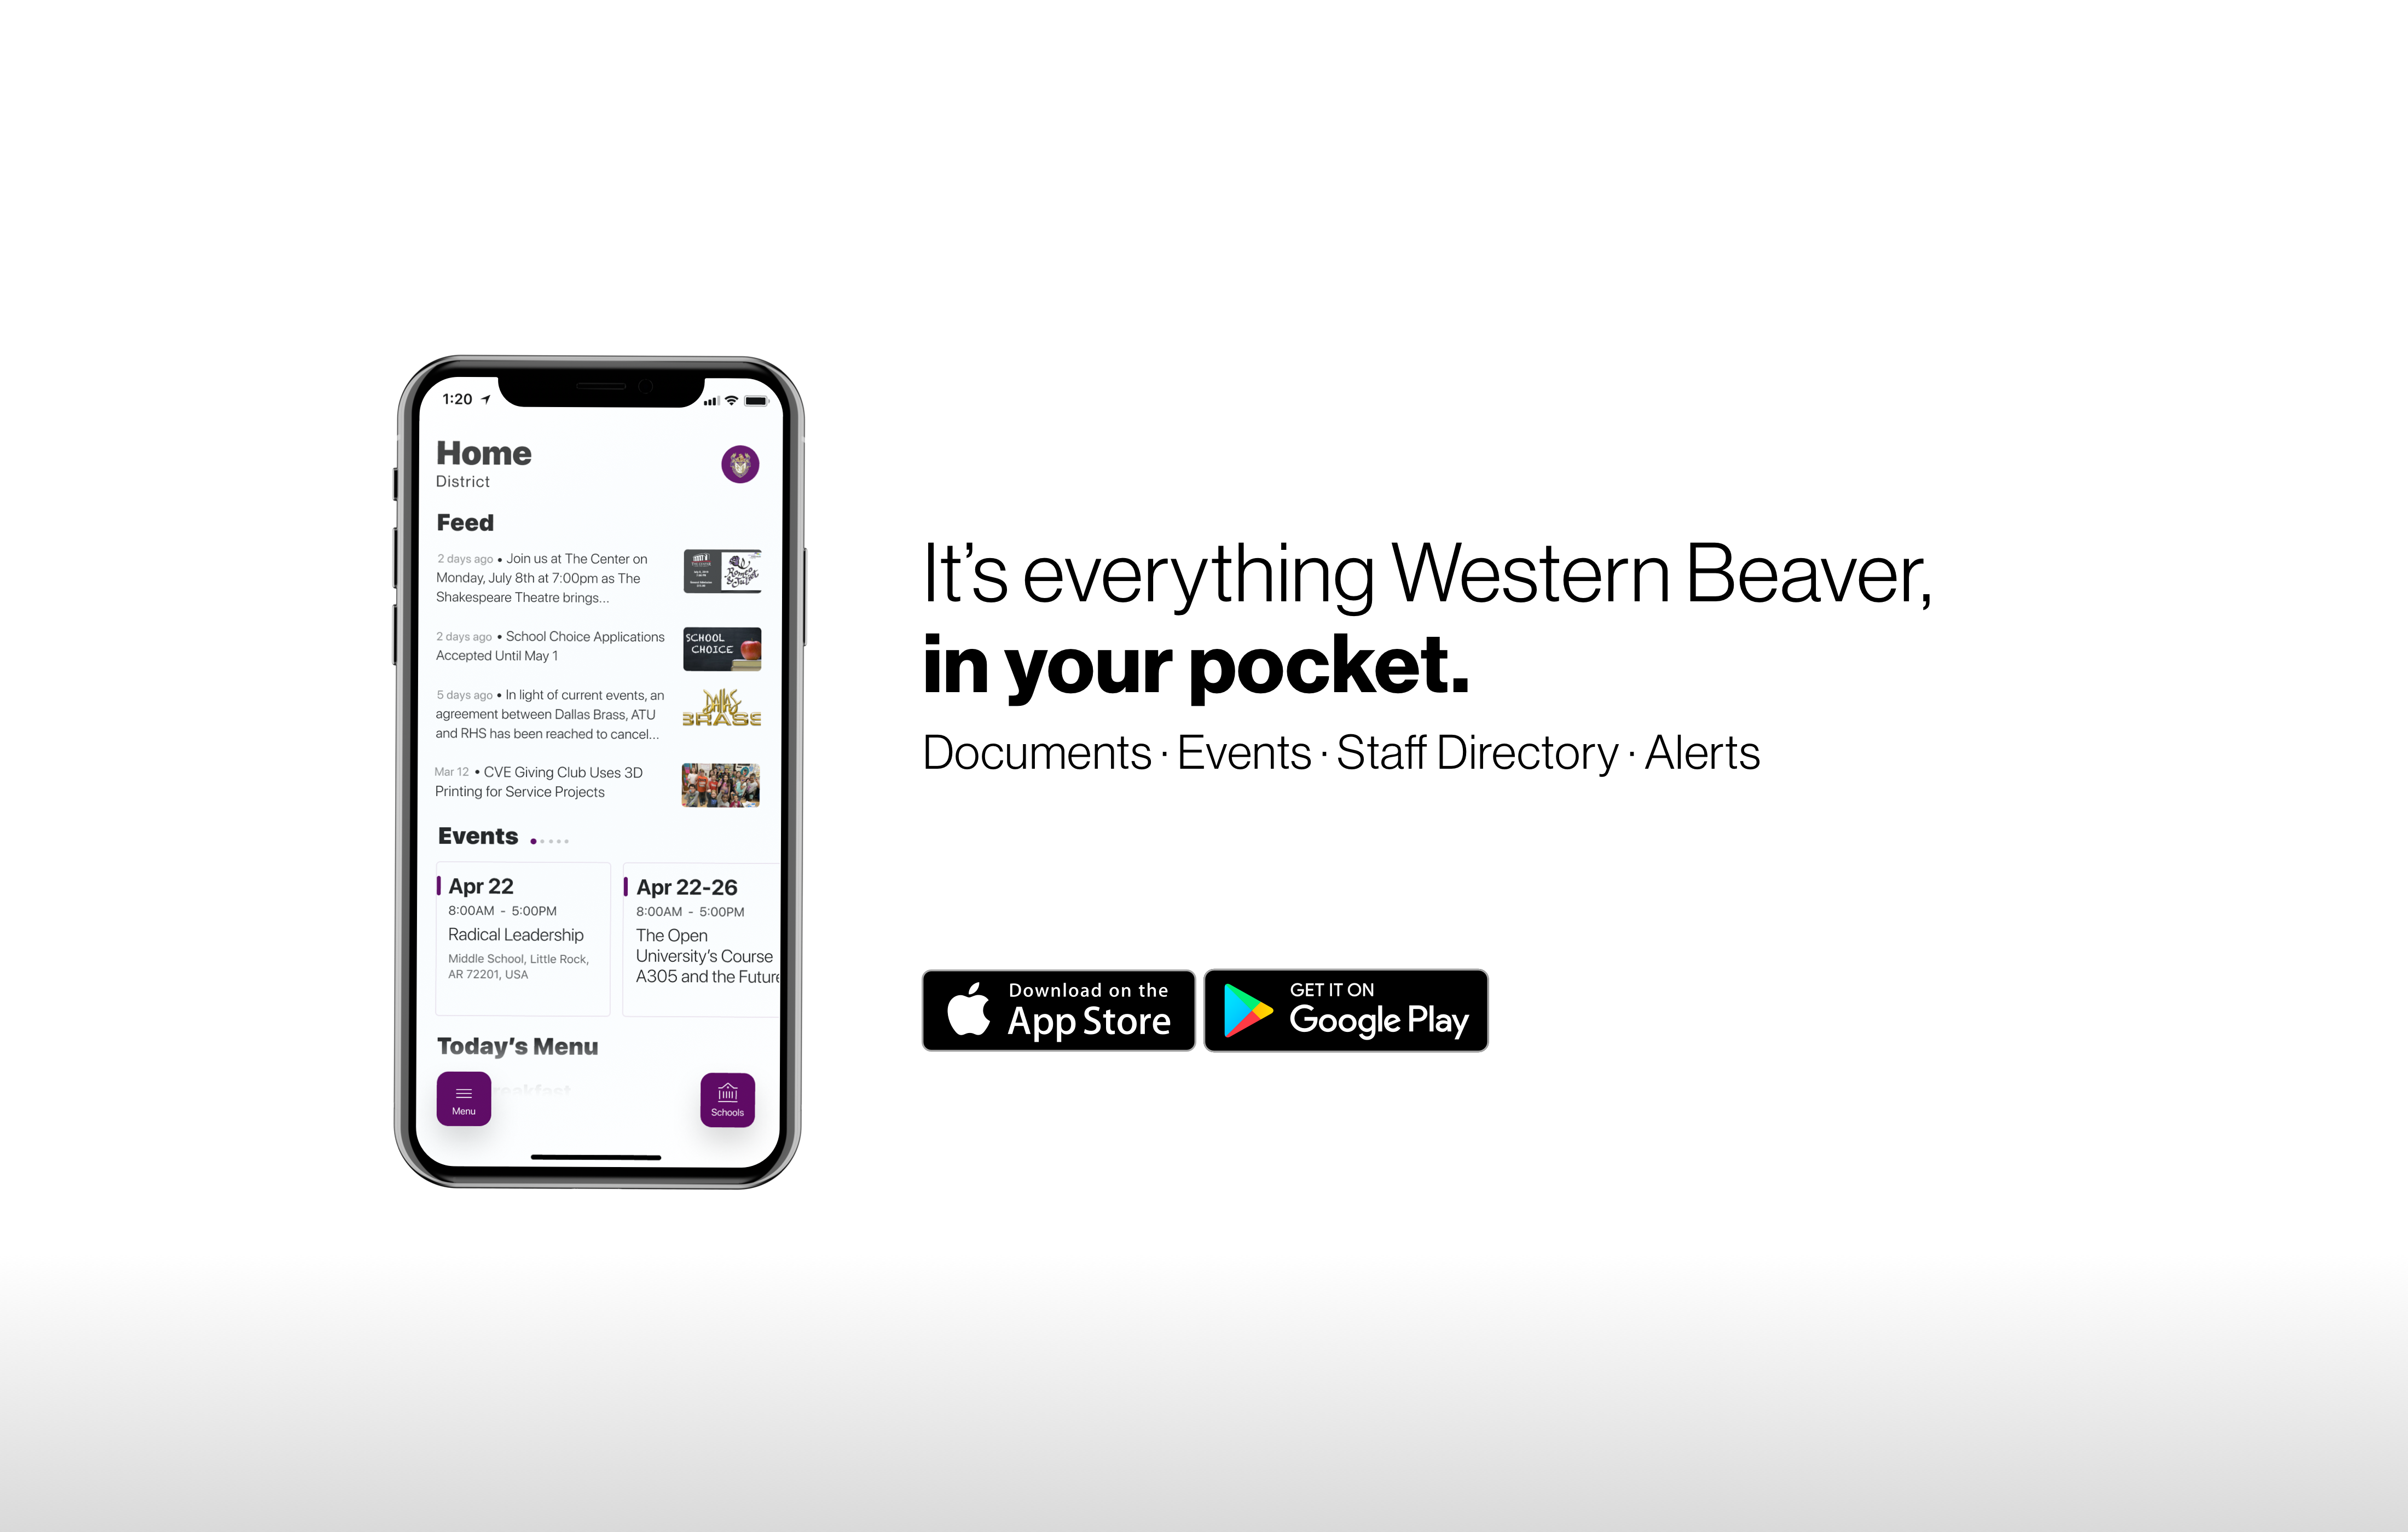 Download the our updated app! It's everything western beaver, in your pocket!